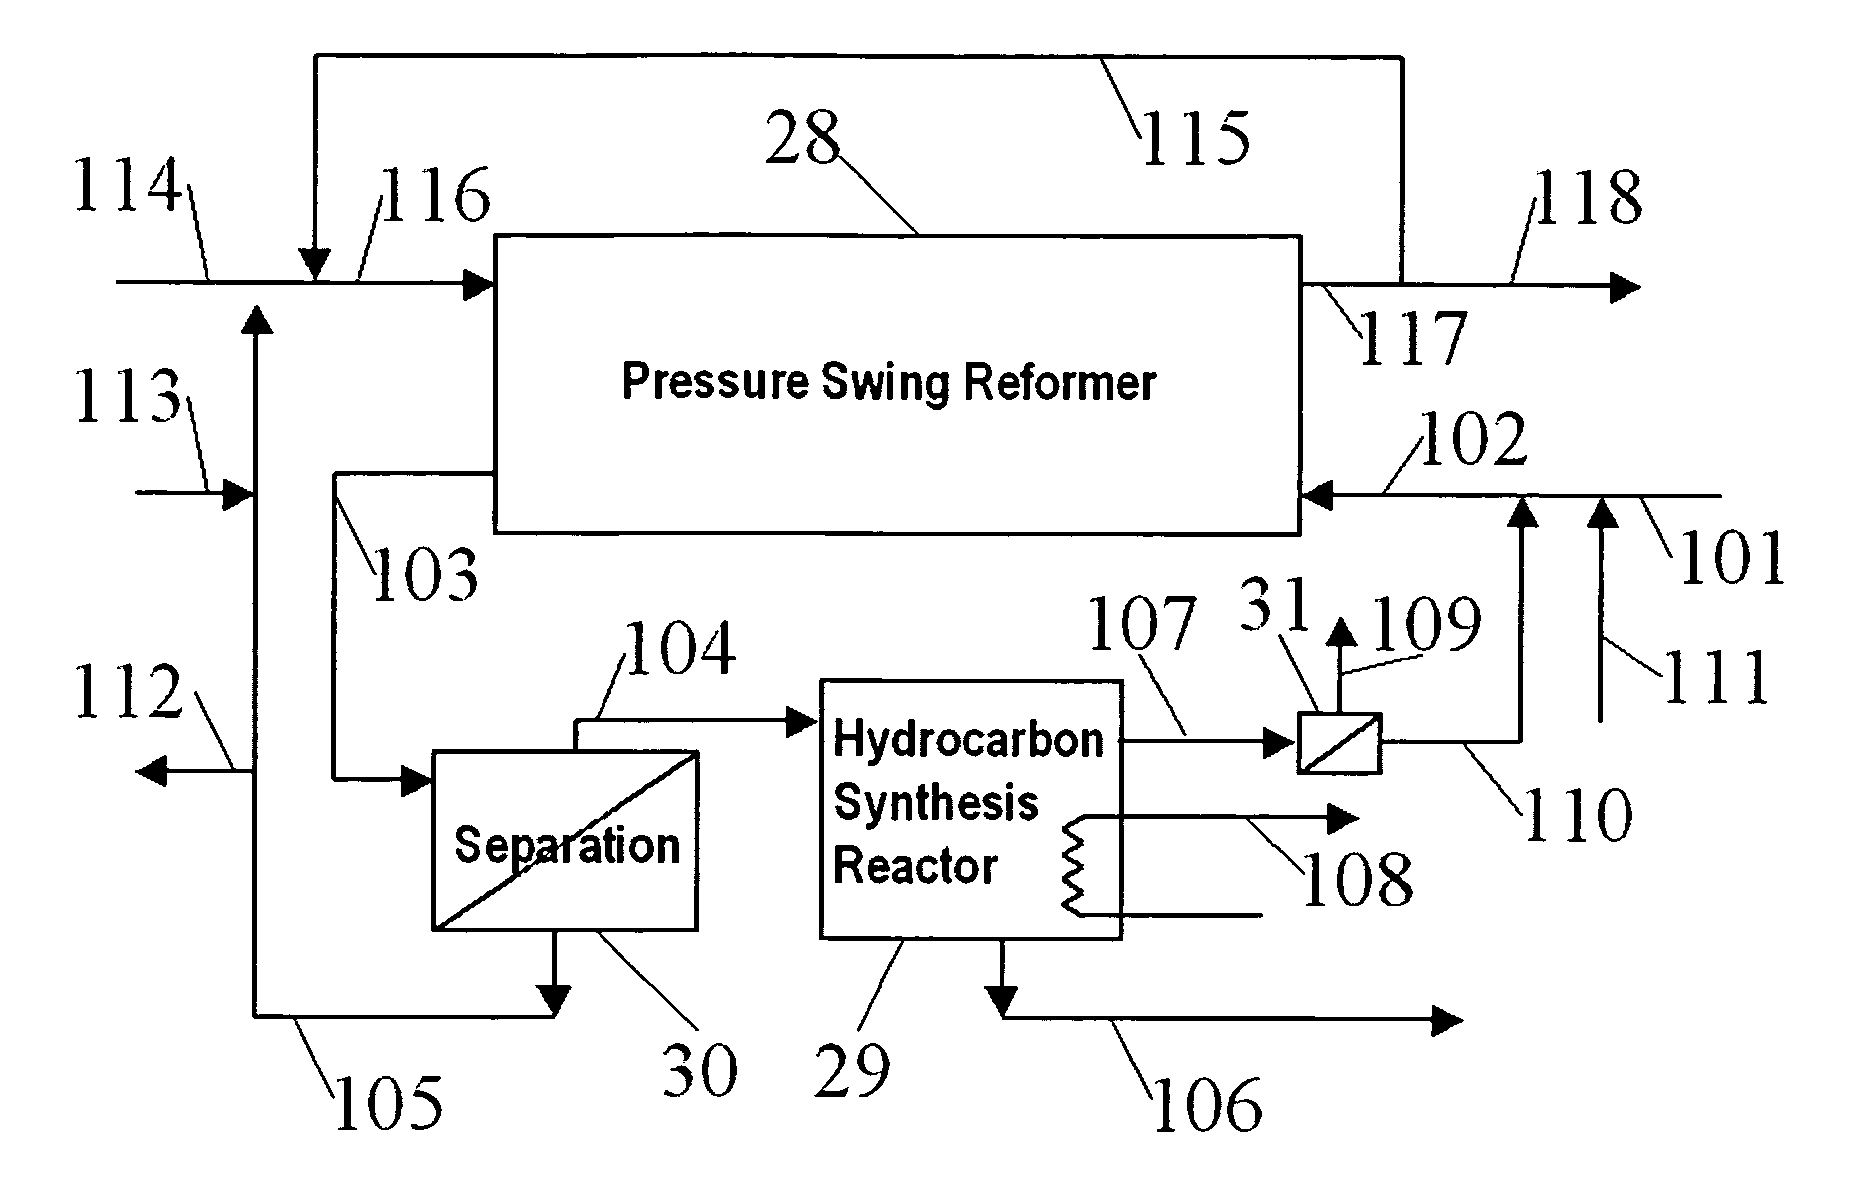 Hydrocarbon synthesis process using pressure swing reforming